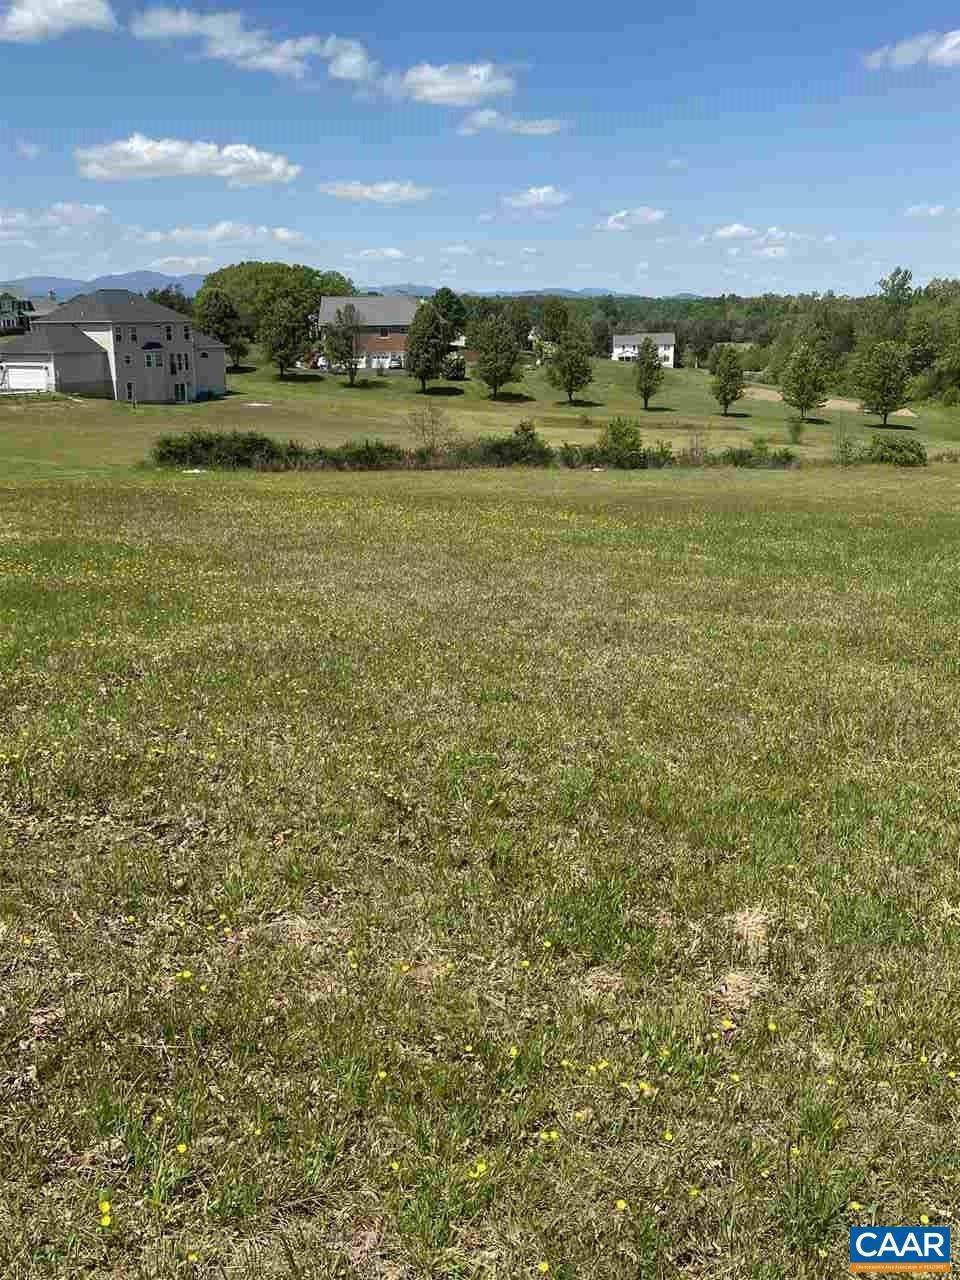 6. Land for Sale at 22 SPOTSWOOD Trail Ruckersville, Virginia 22968 United States